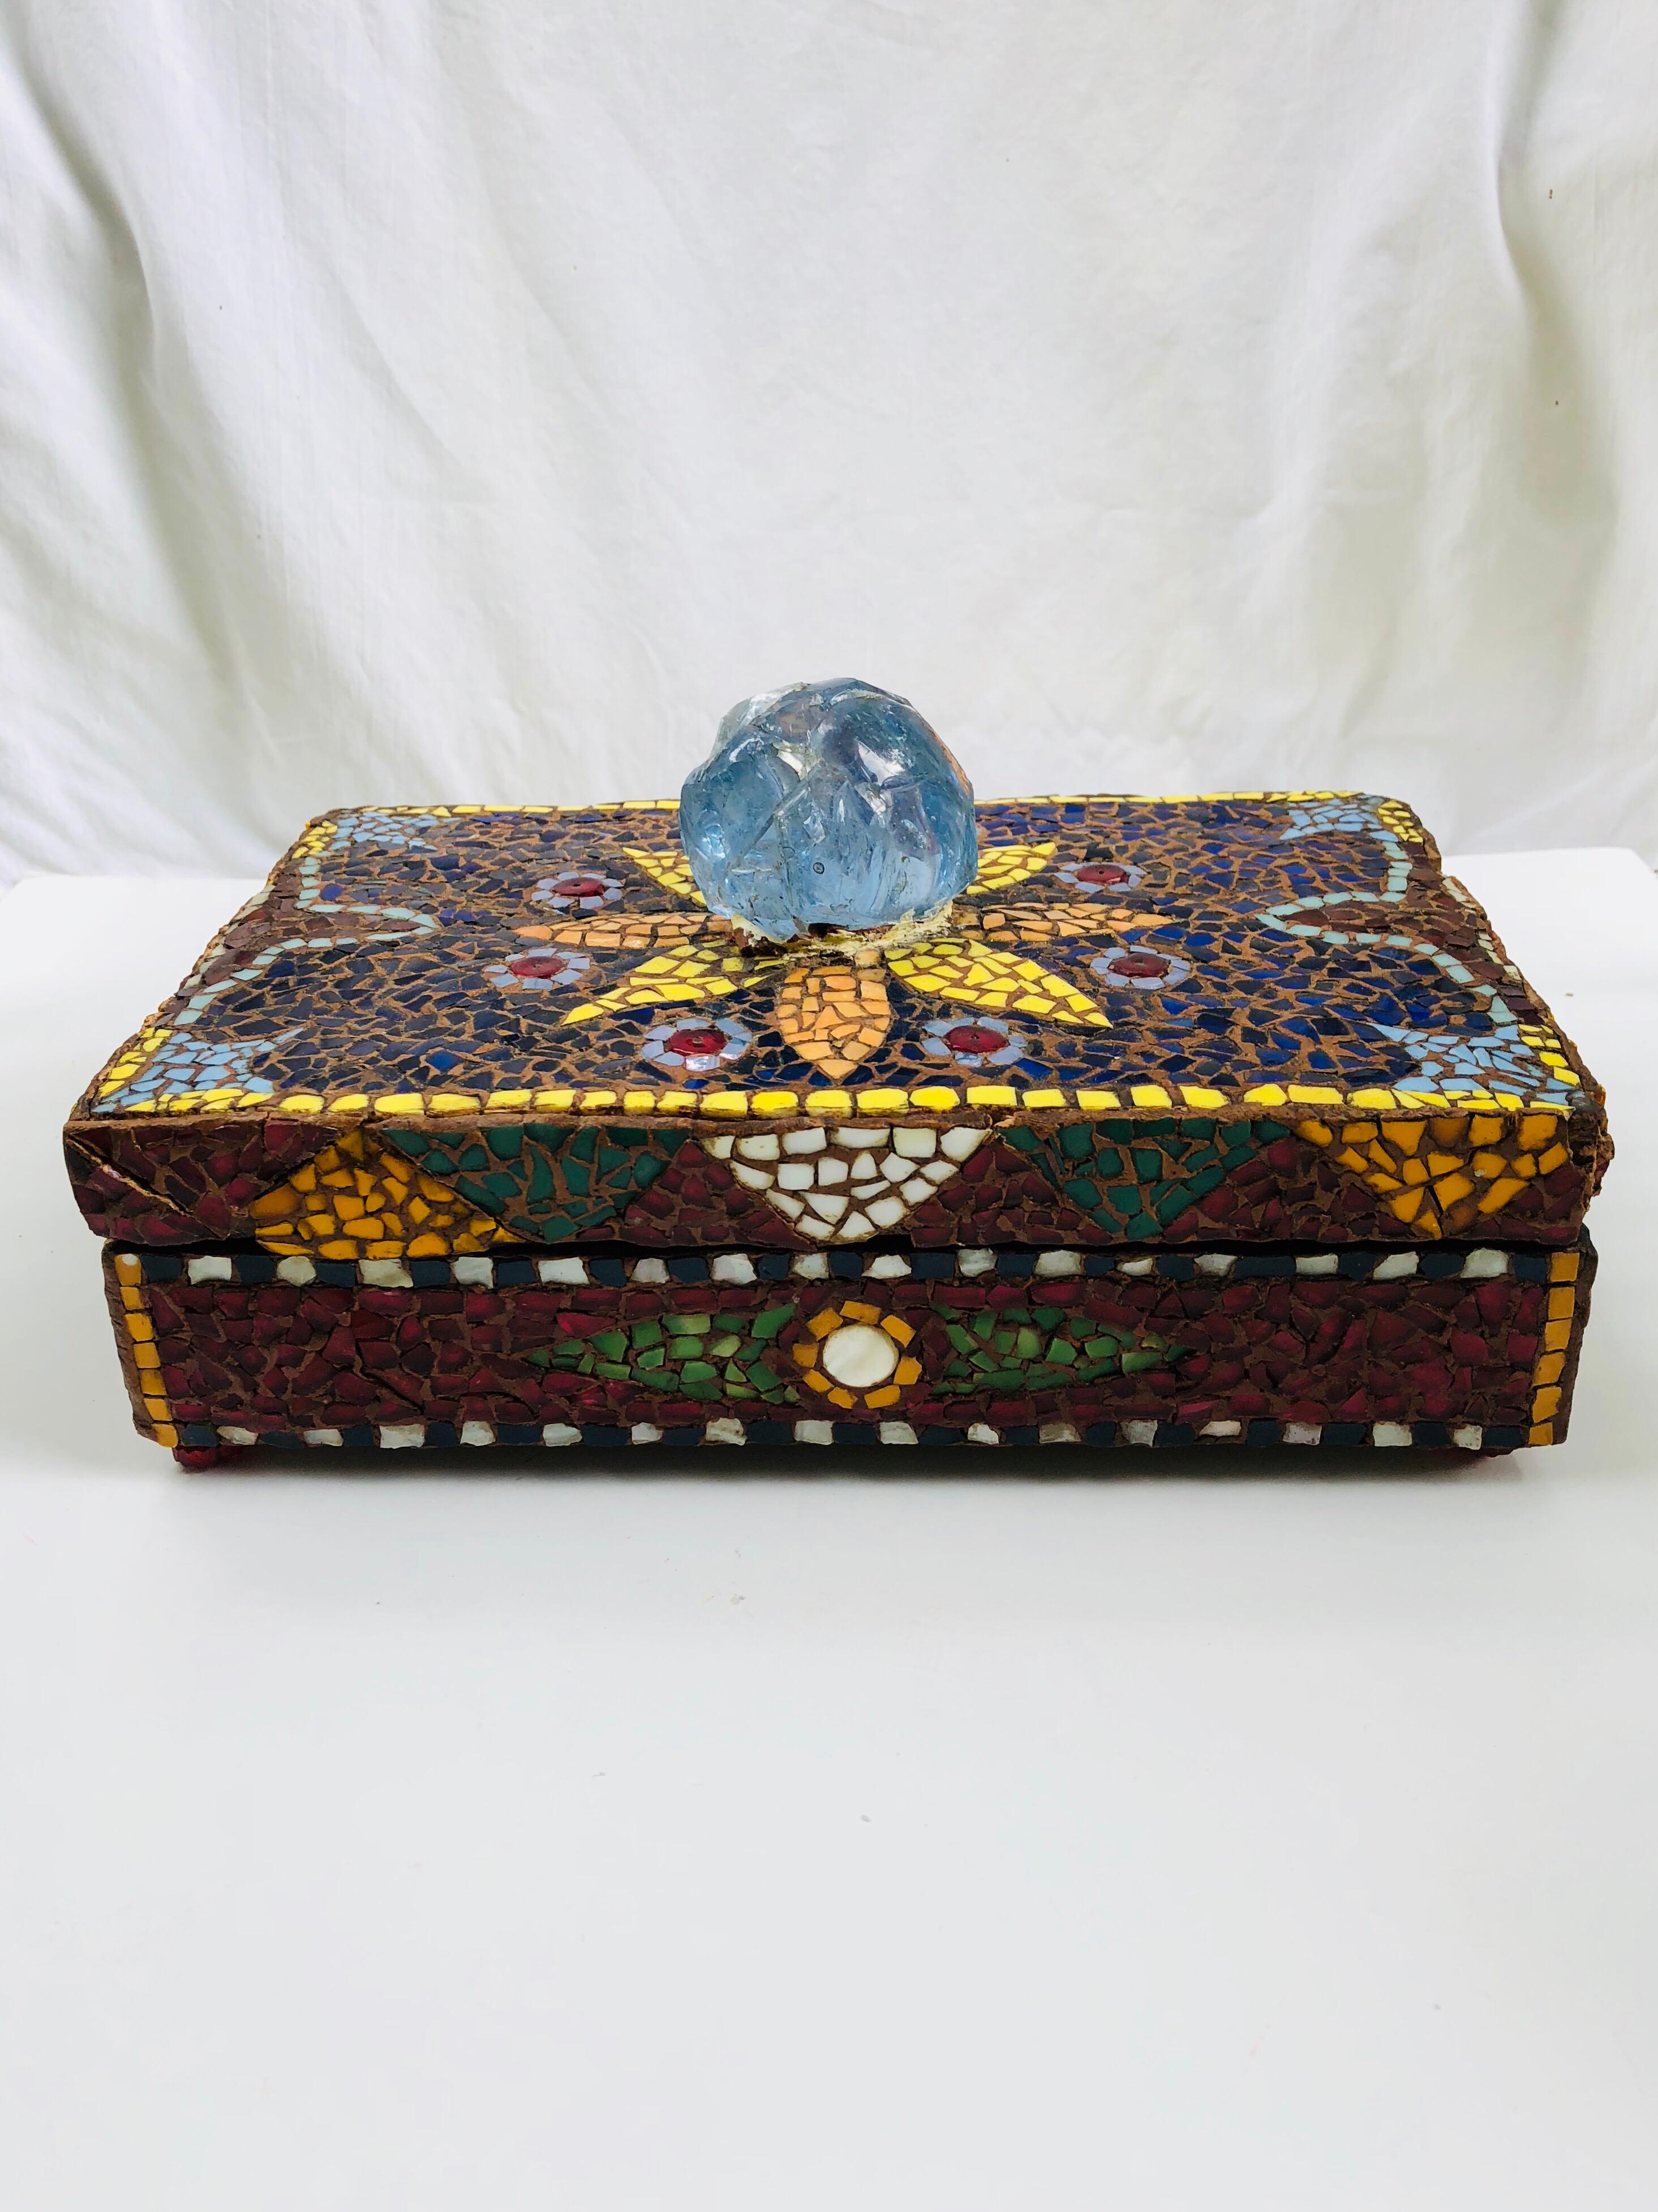 Pique Assiette French mosaic rectangular box with an enormous piece of blue translucent glass on the lid. Starburst pattern on the lid. Decorated with porcelain fragments on the entire surface, circa 1950. Red carved glass beads support the